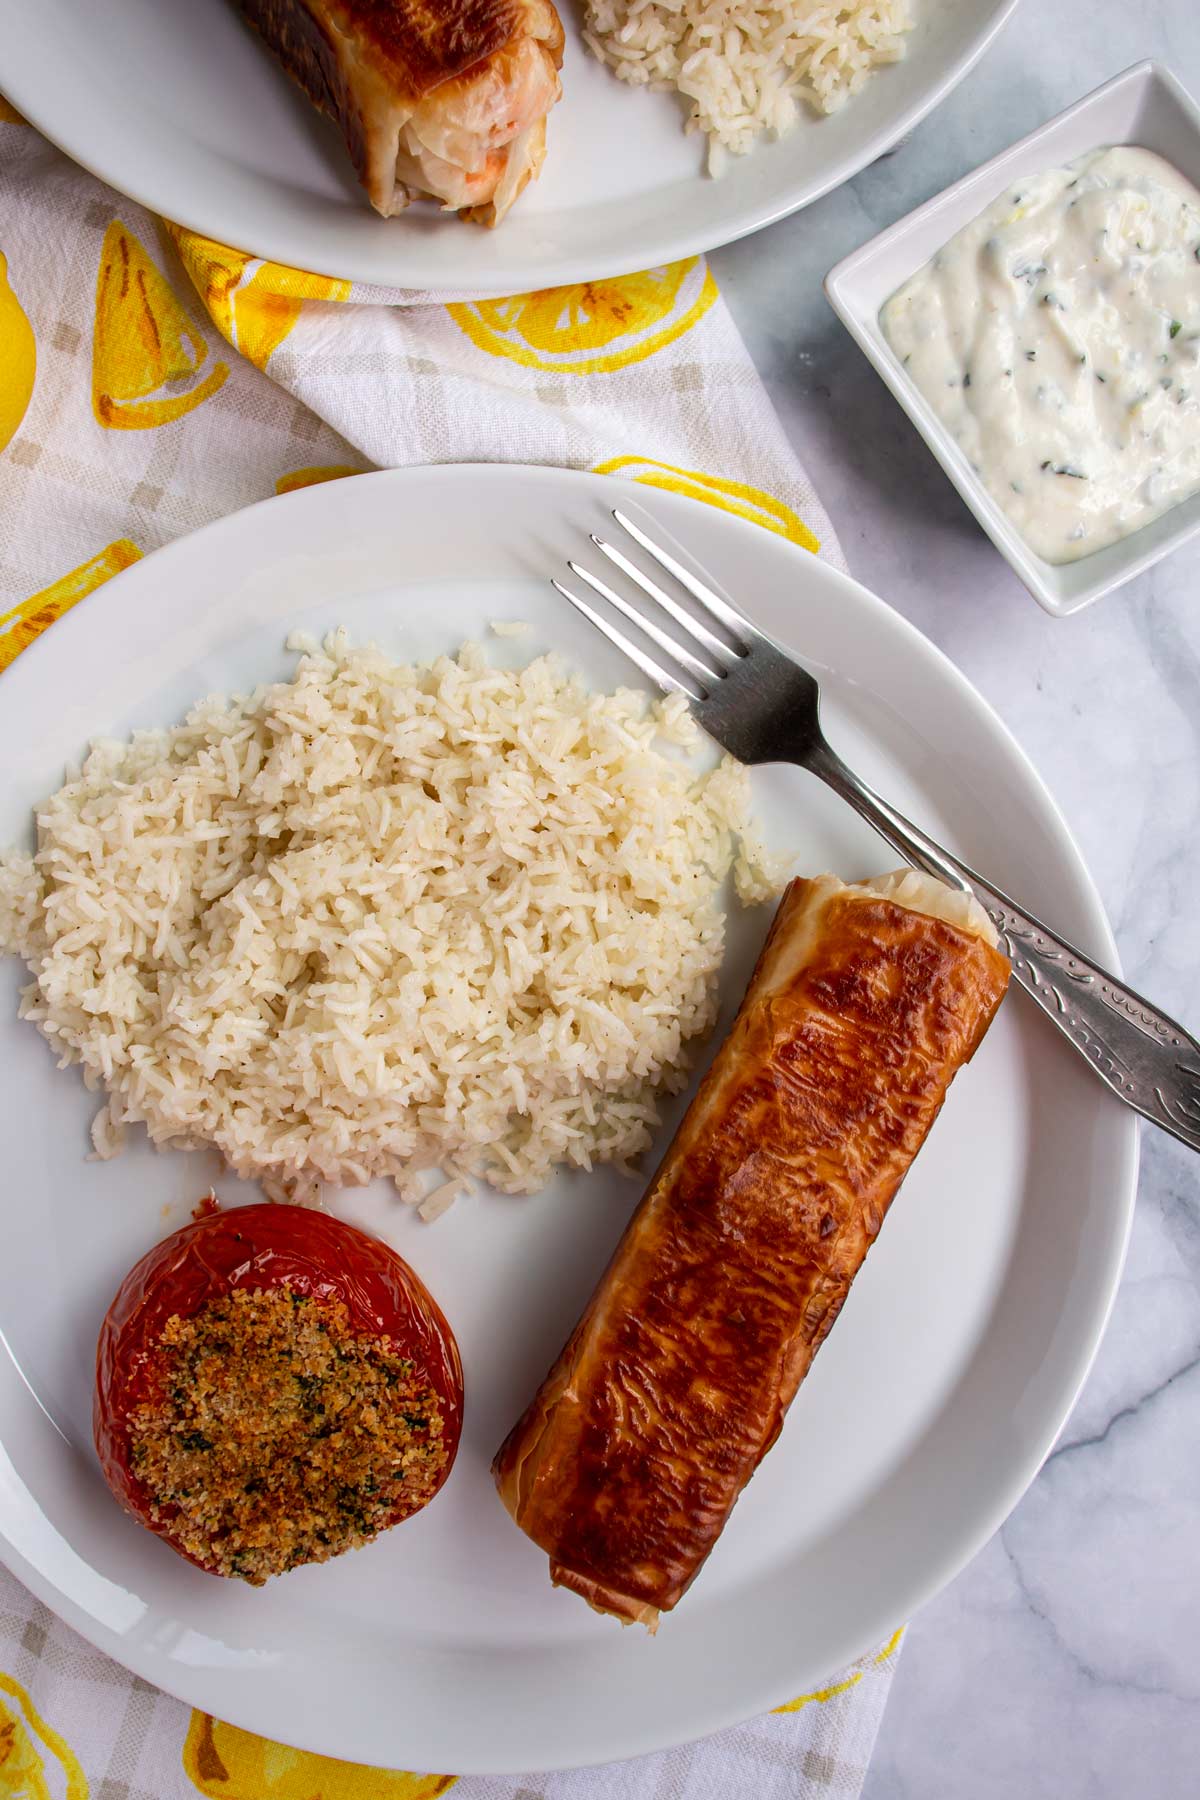 Salmon in phyllo, white rice, and a baked tomato on a white plate with a fork.